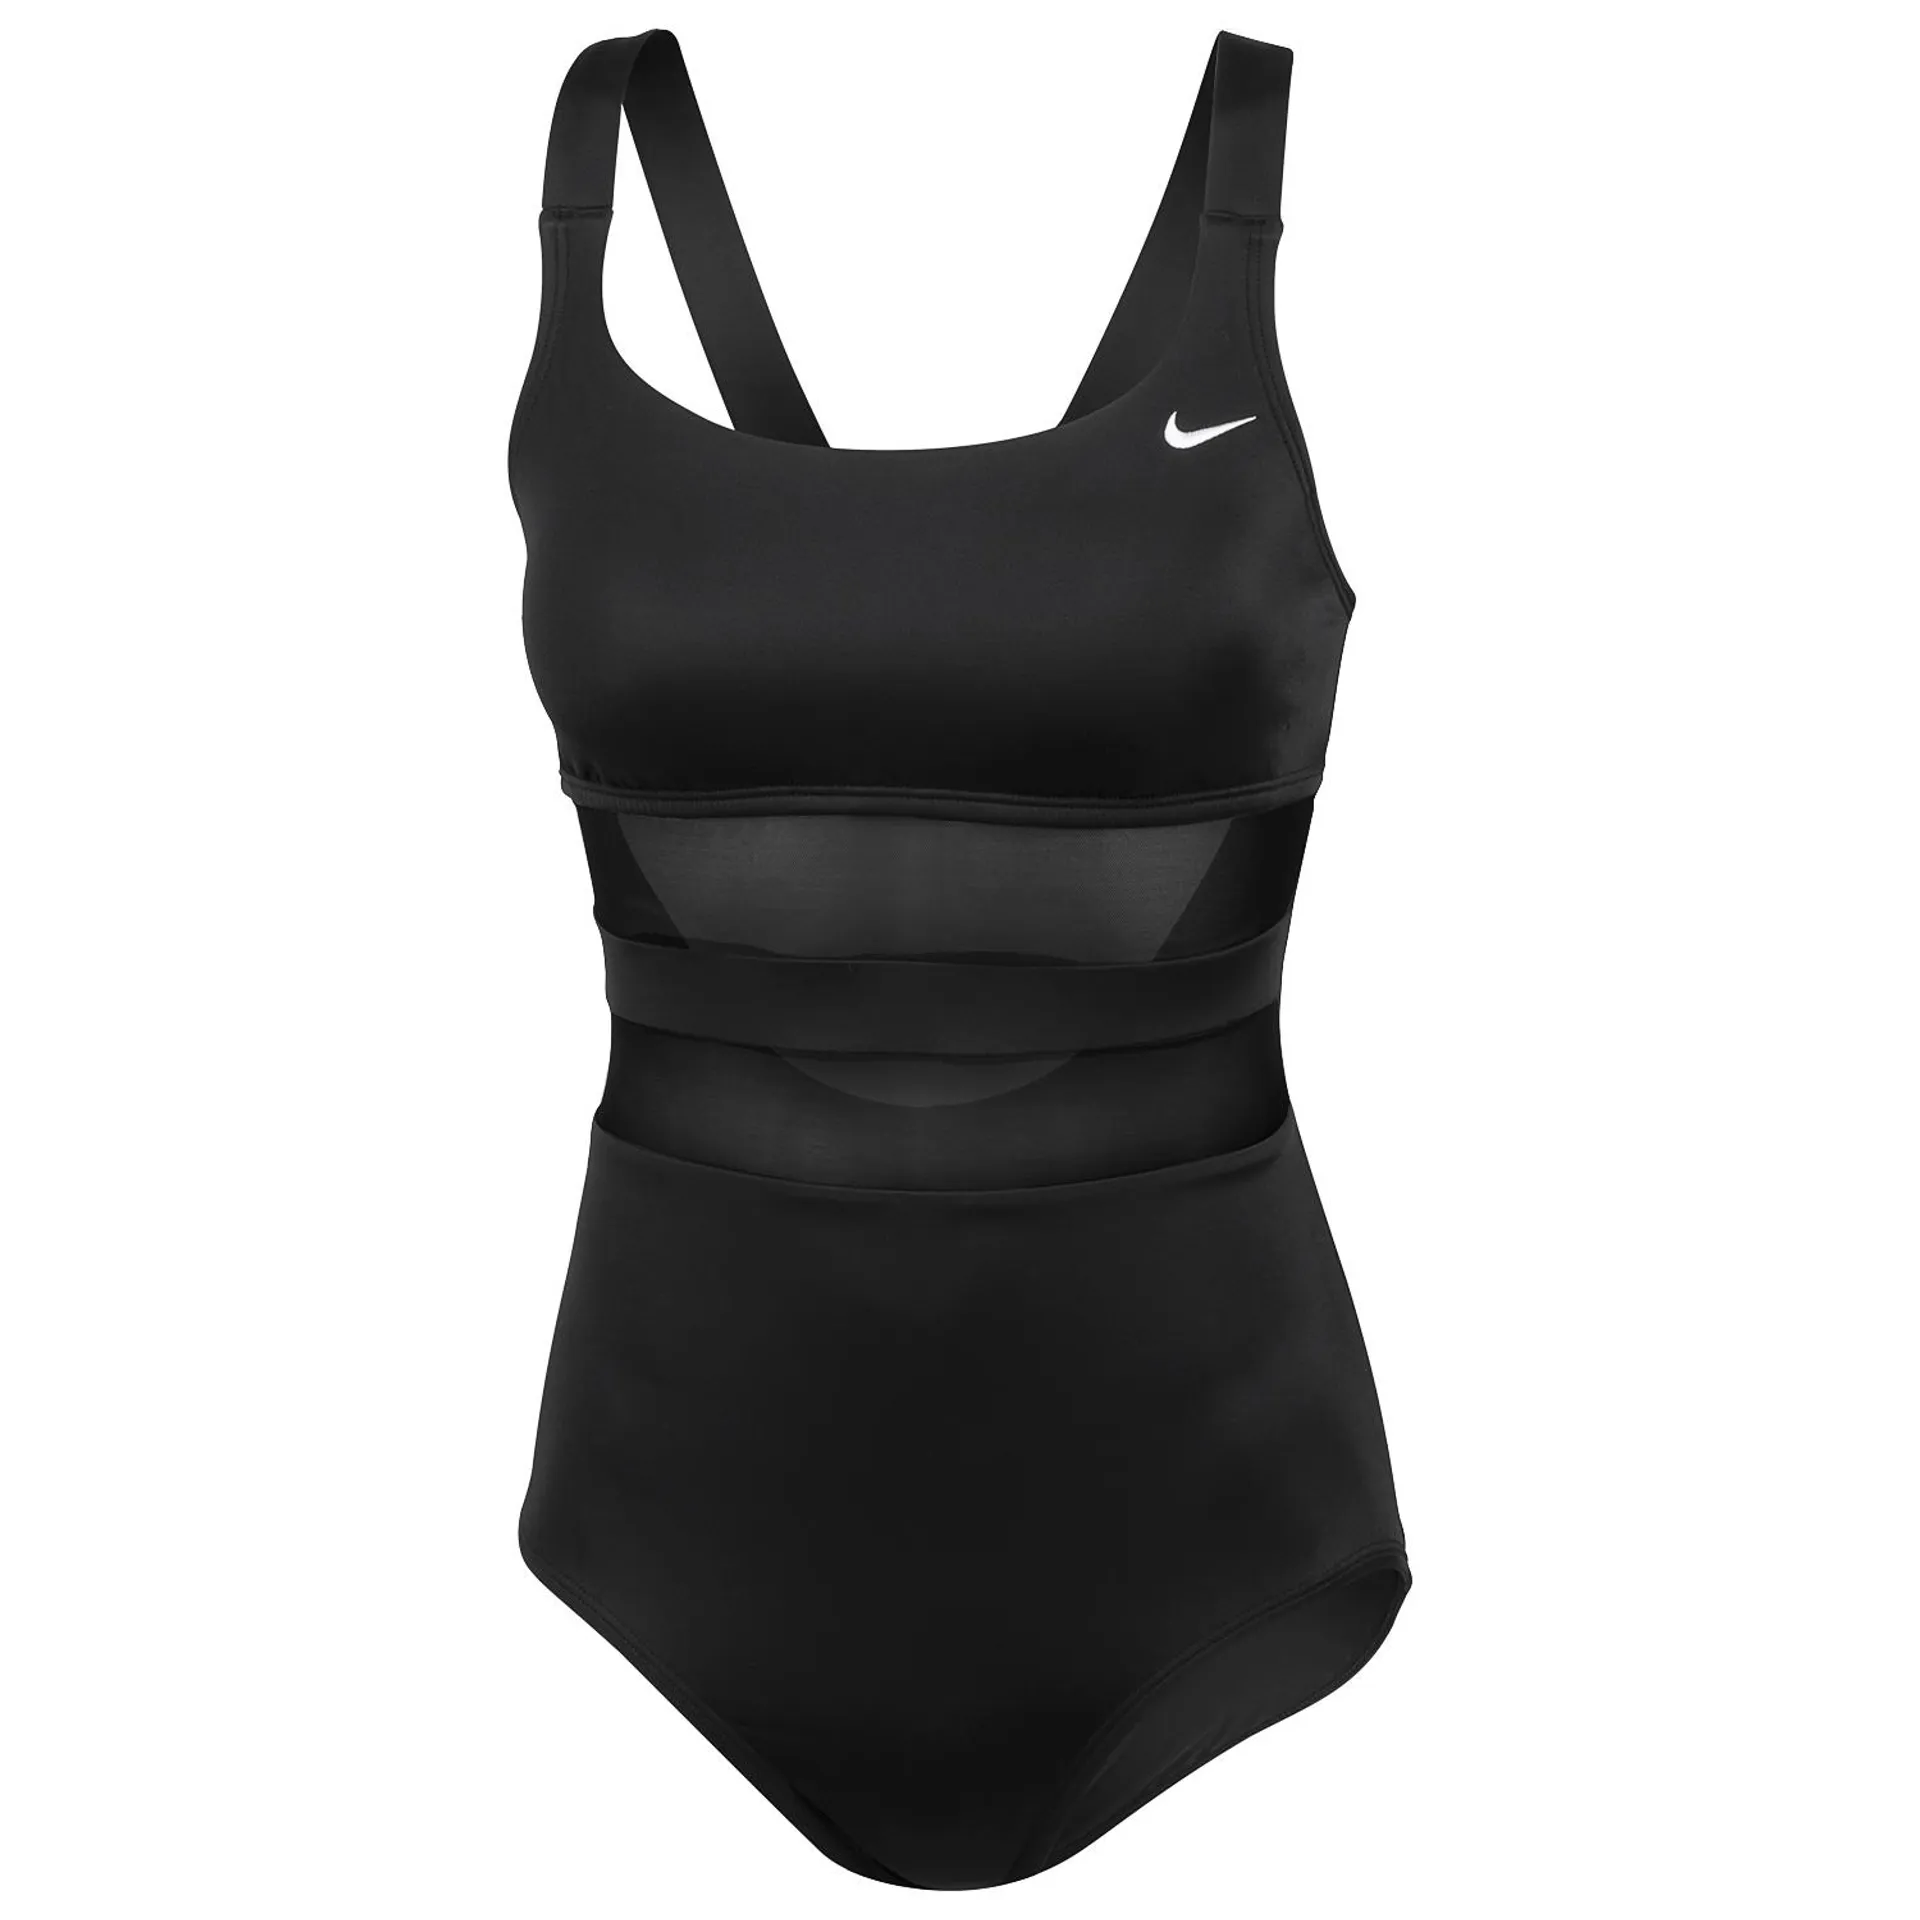 Nike Women's Solid Mesh V-Back One-Piece Swimsuit